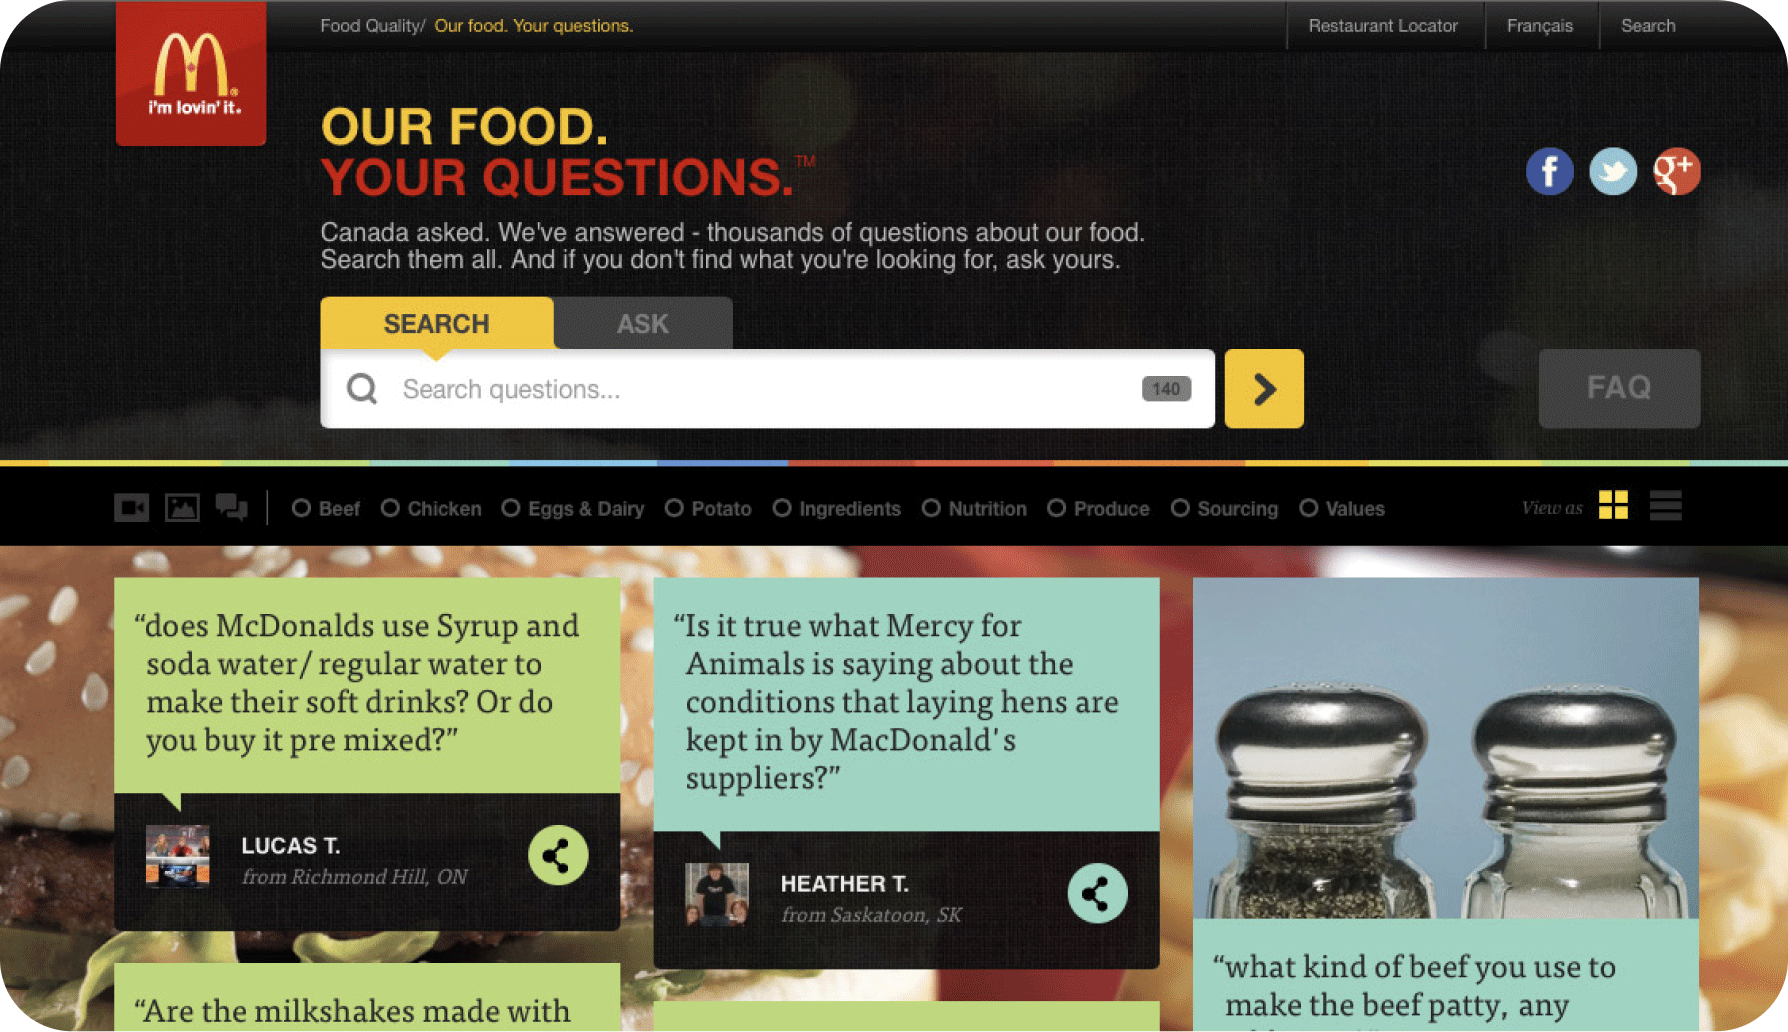 Screenshot of McDonalds Our Food, Your Questions website